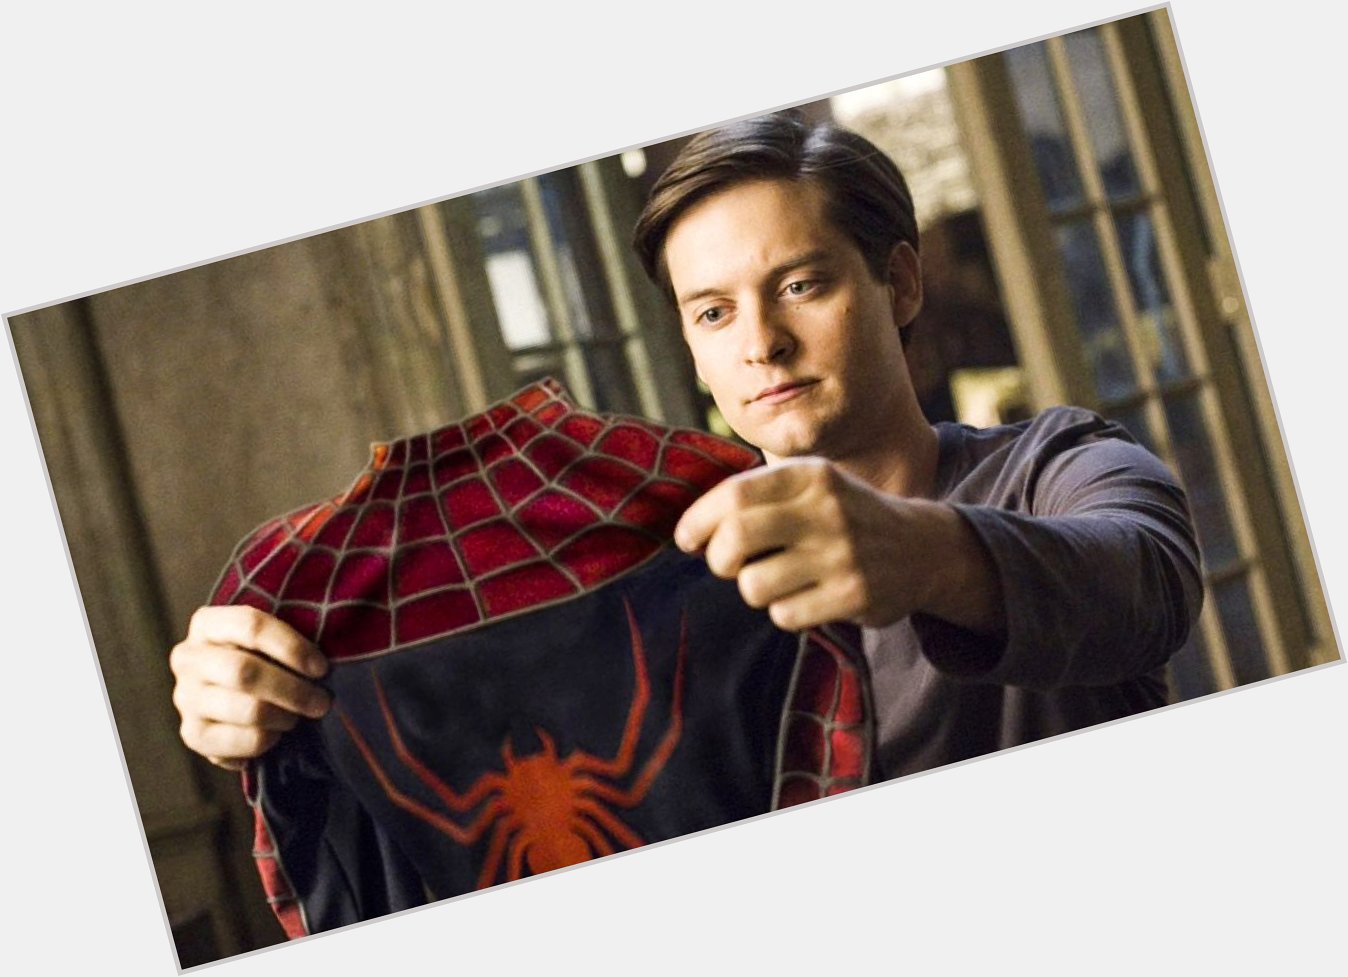 Happy Birthday to Tobey Maguire. 

The Spider-Man I grew up with and still love to this day. 